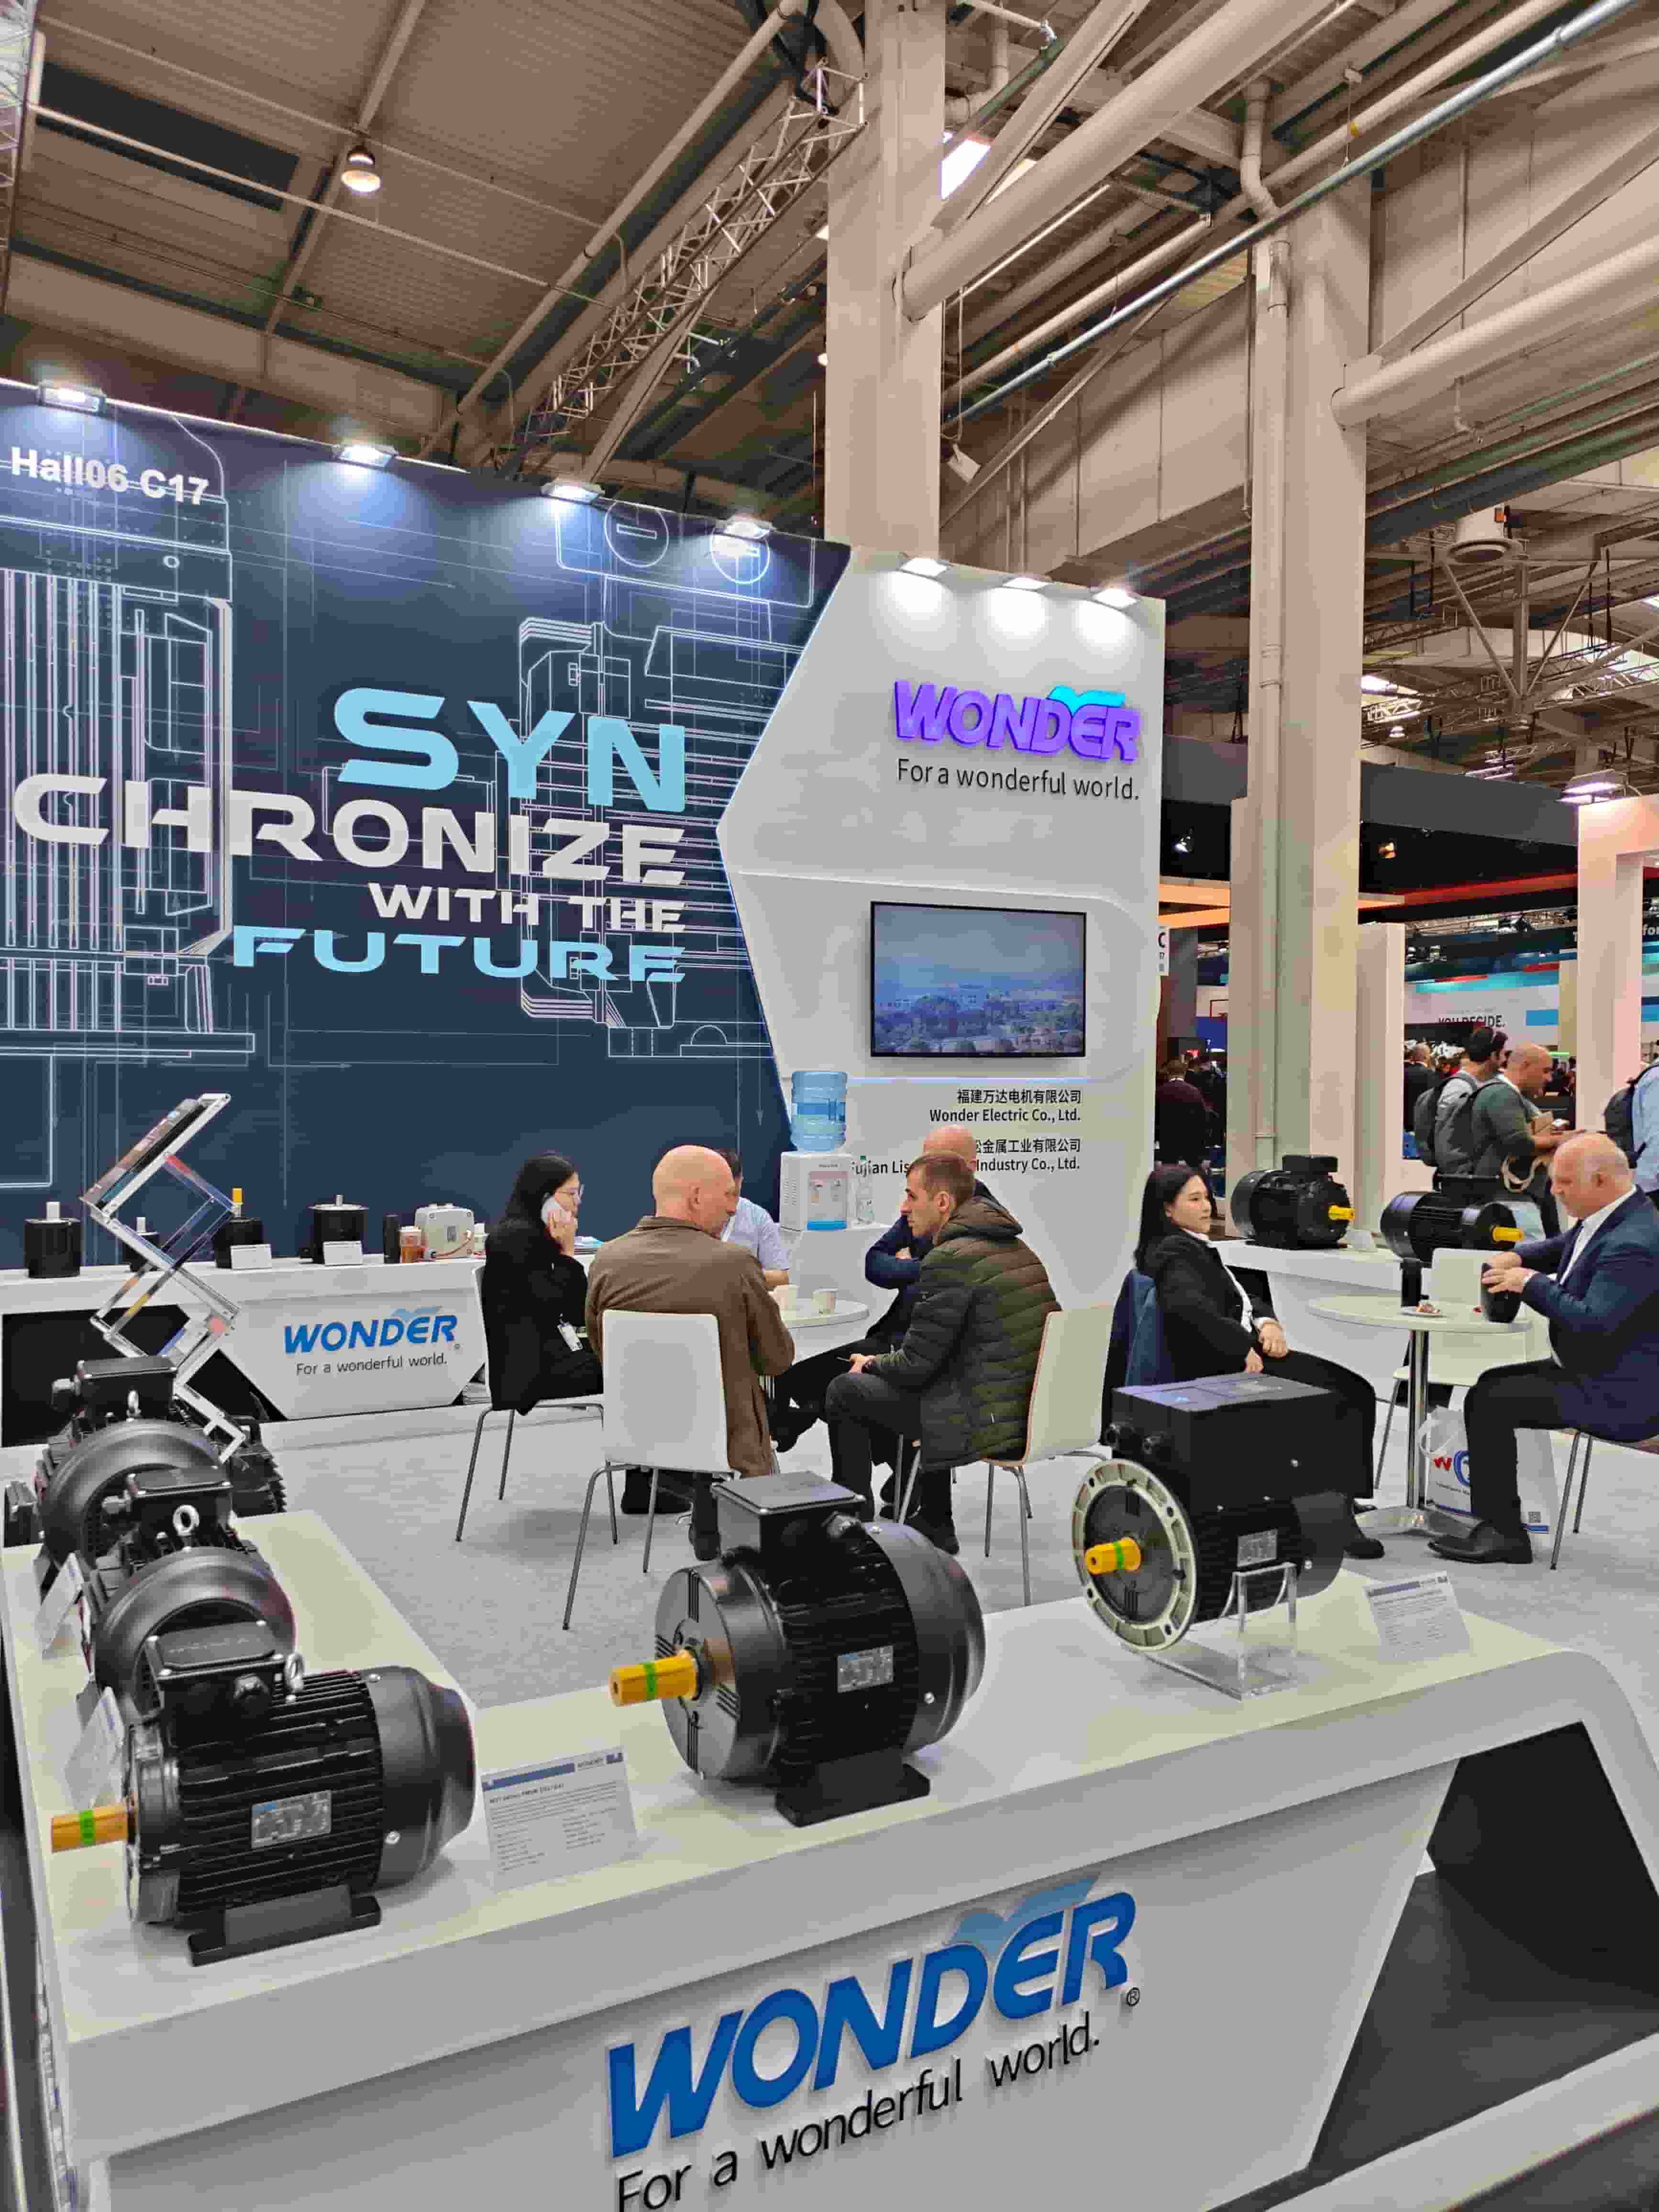 Wonder shines at Hannover Messe, permanent magnet synchronous motors are well received!